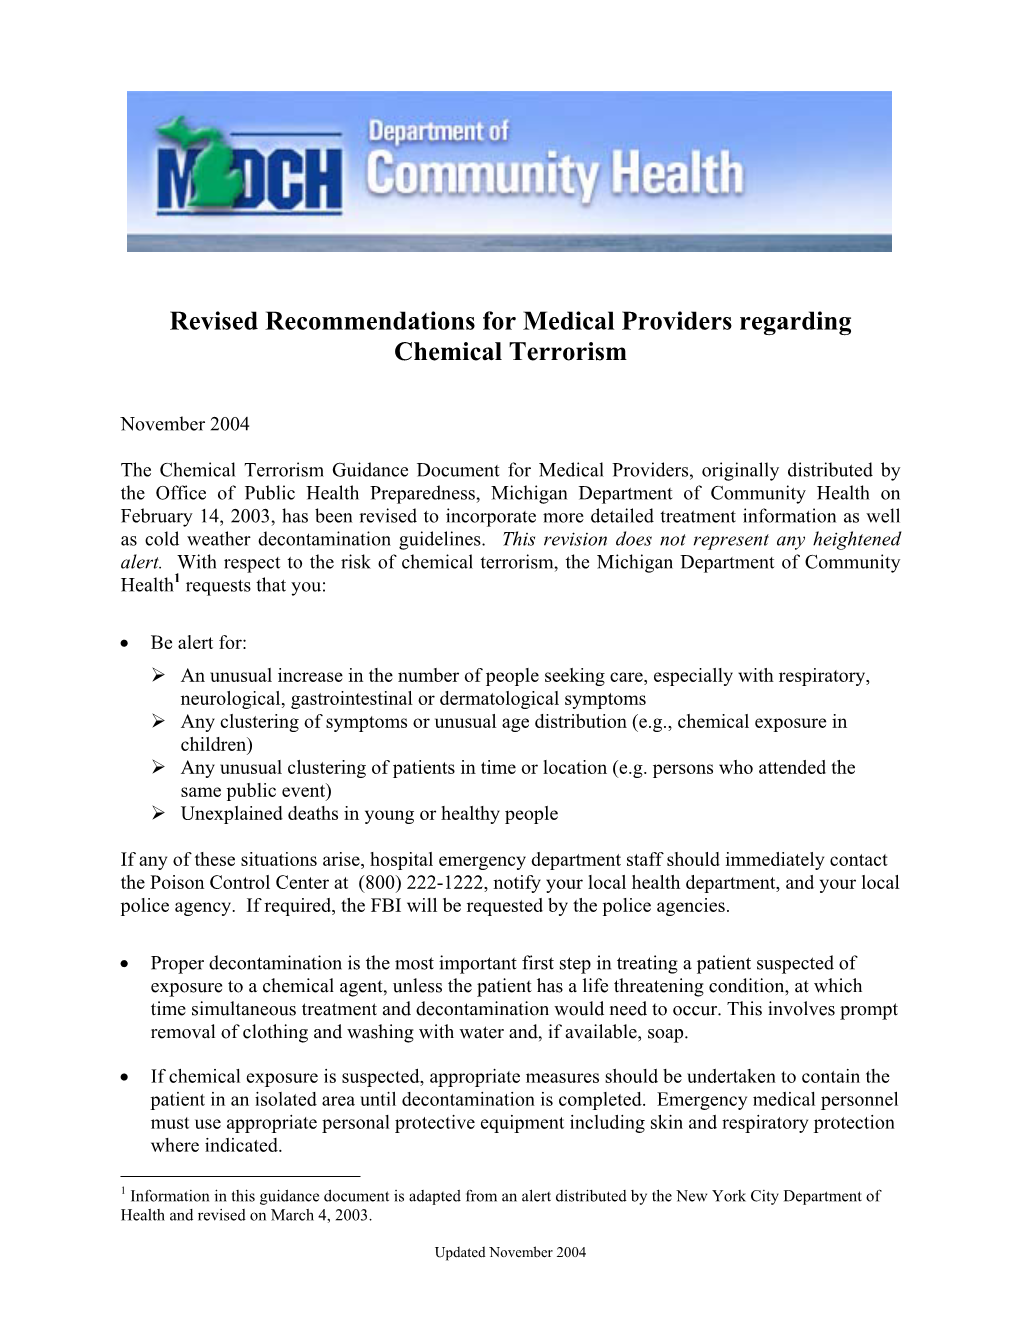 Revised Recommendations for Medical Providers Regarding Chemical Terrorism